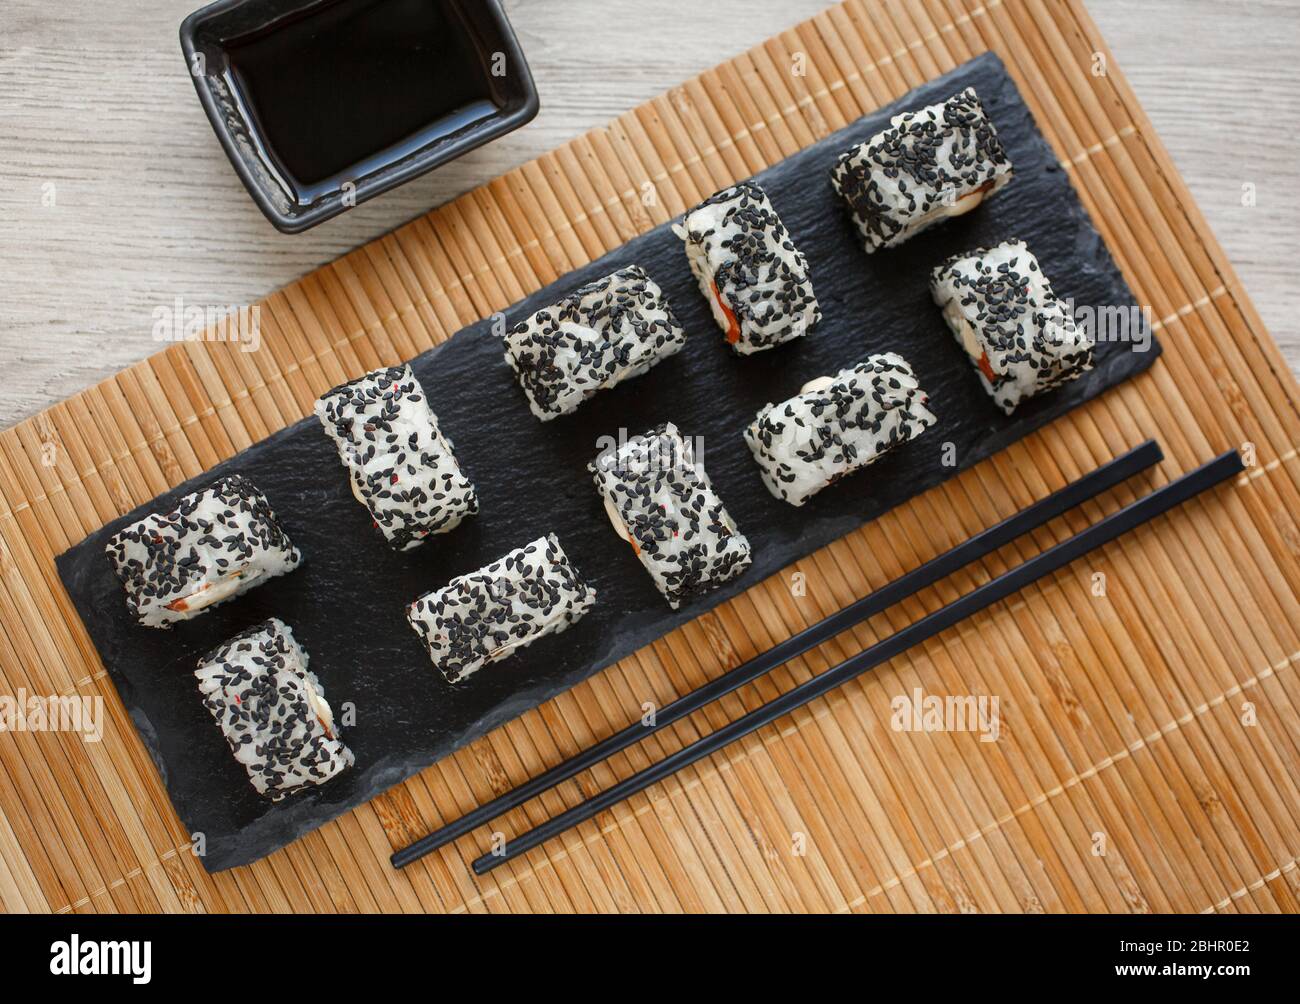 Minimalism and sophistication: delicious salmon and avocado sushi covered with black sesame seeds. Served with ginger and wasabi on a black stone. Stock Photo